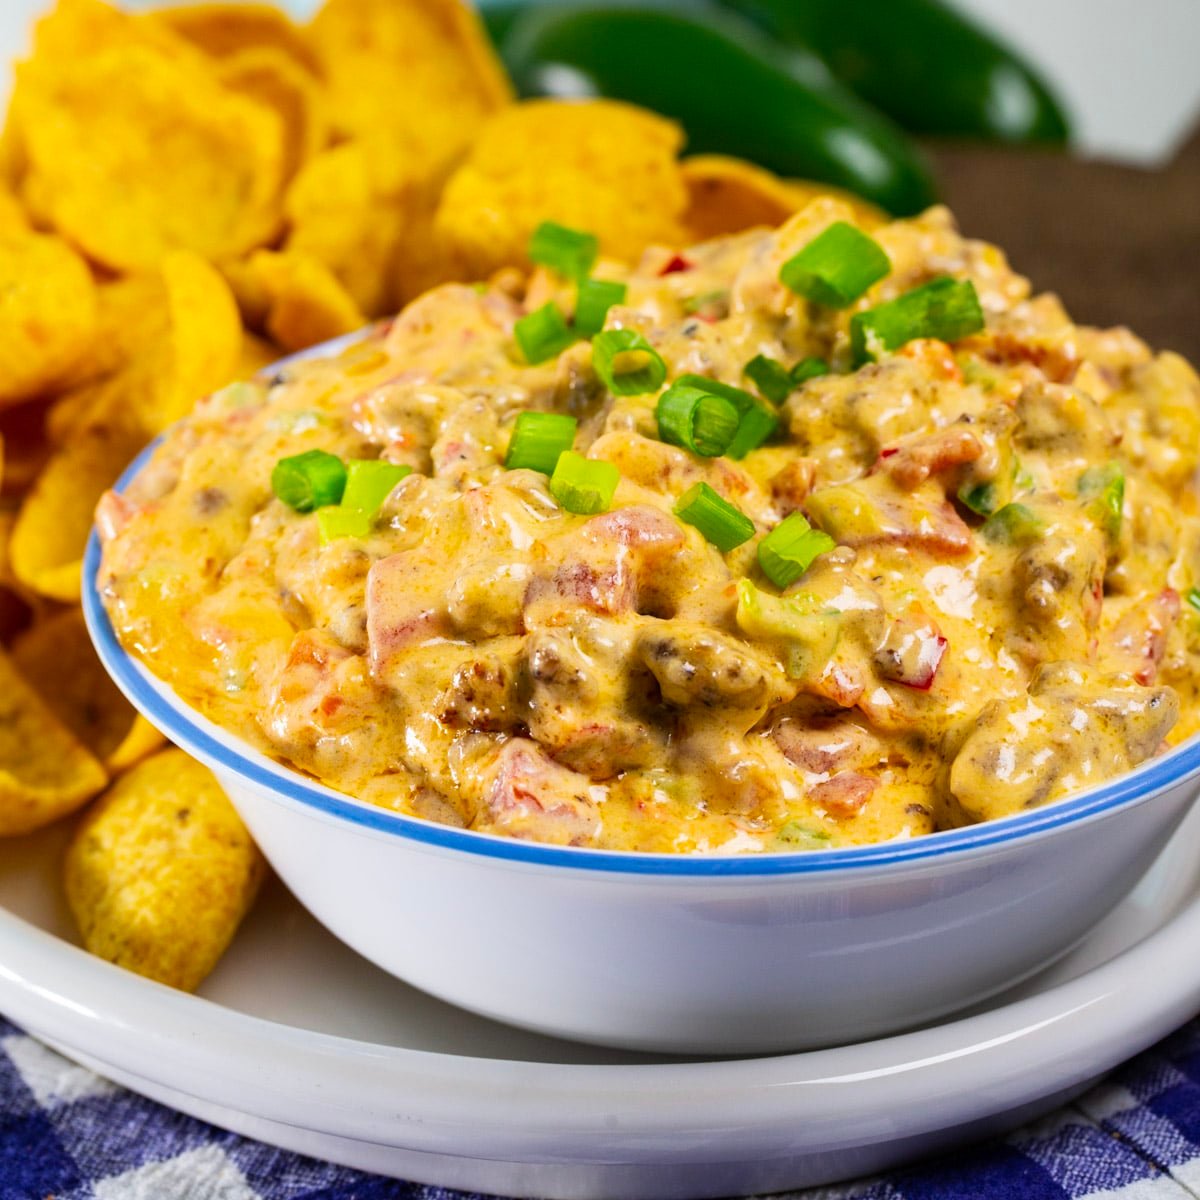 Sausage Pimento Cheese Dip in a bowl.